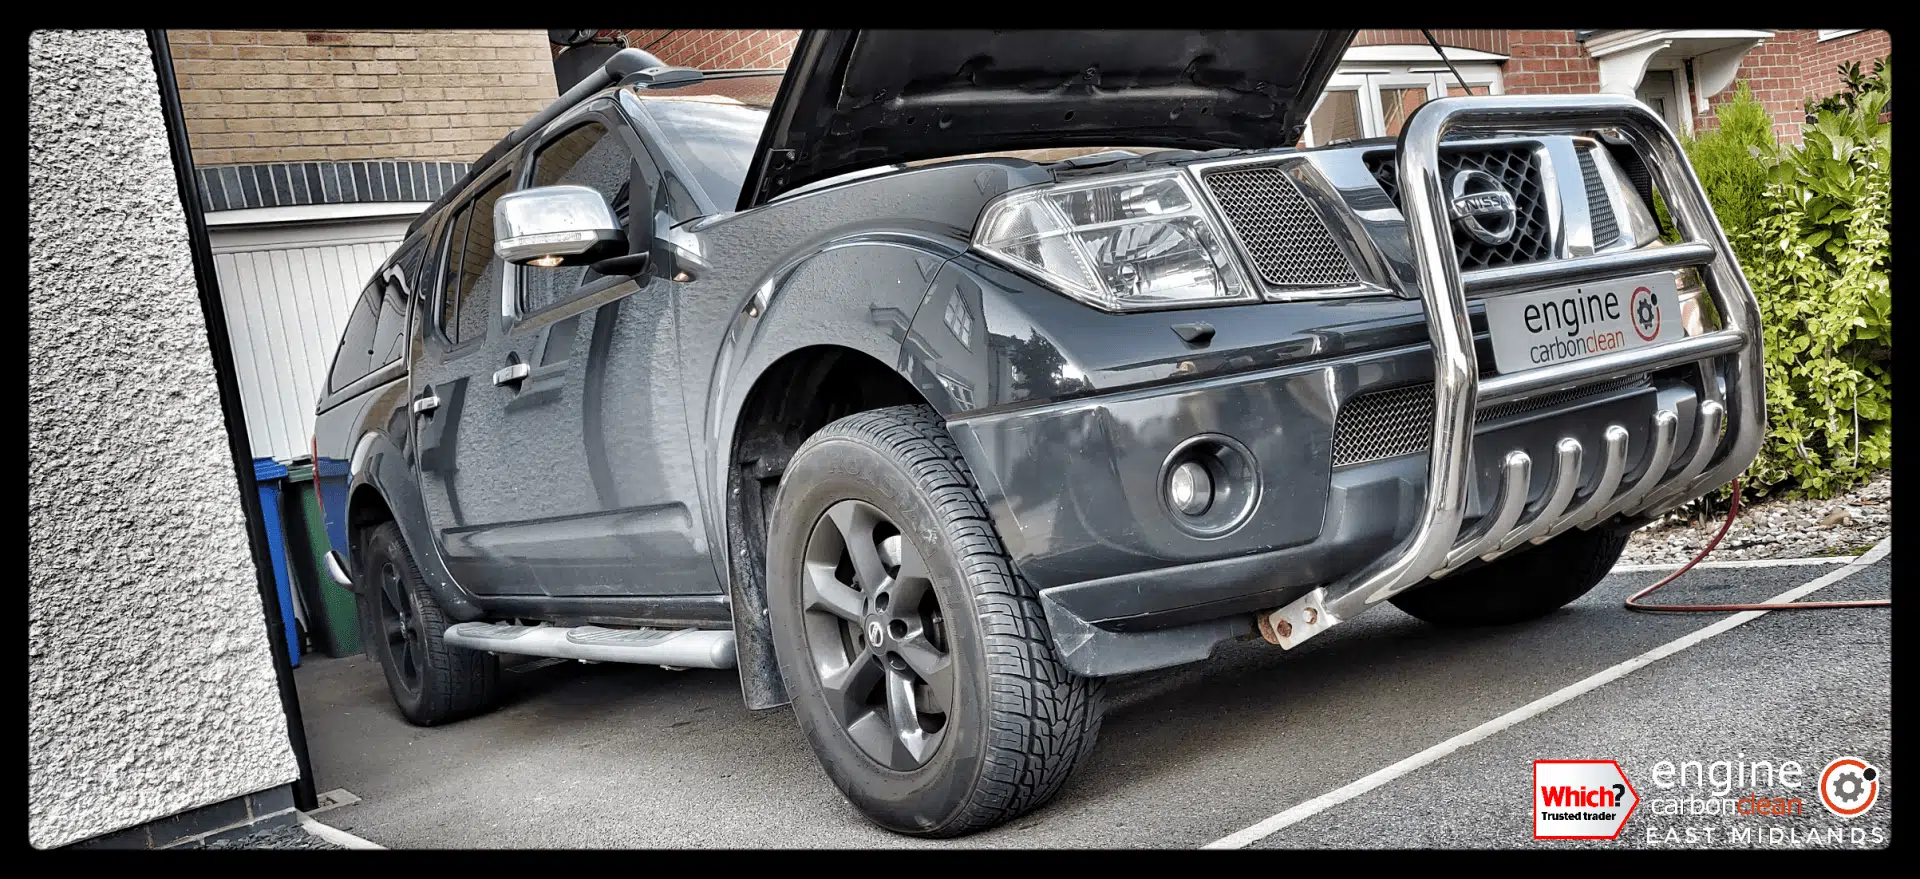 Just bought a vehicle? Diagnostic consultation and Engine Carbon Clean on a Nissan Navara 2.5dci (2010 - 76,164 miles)